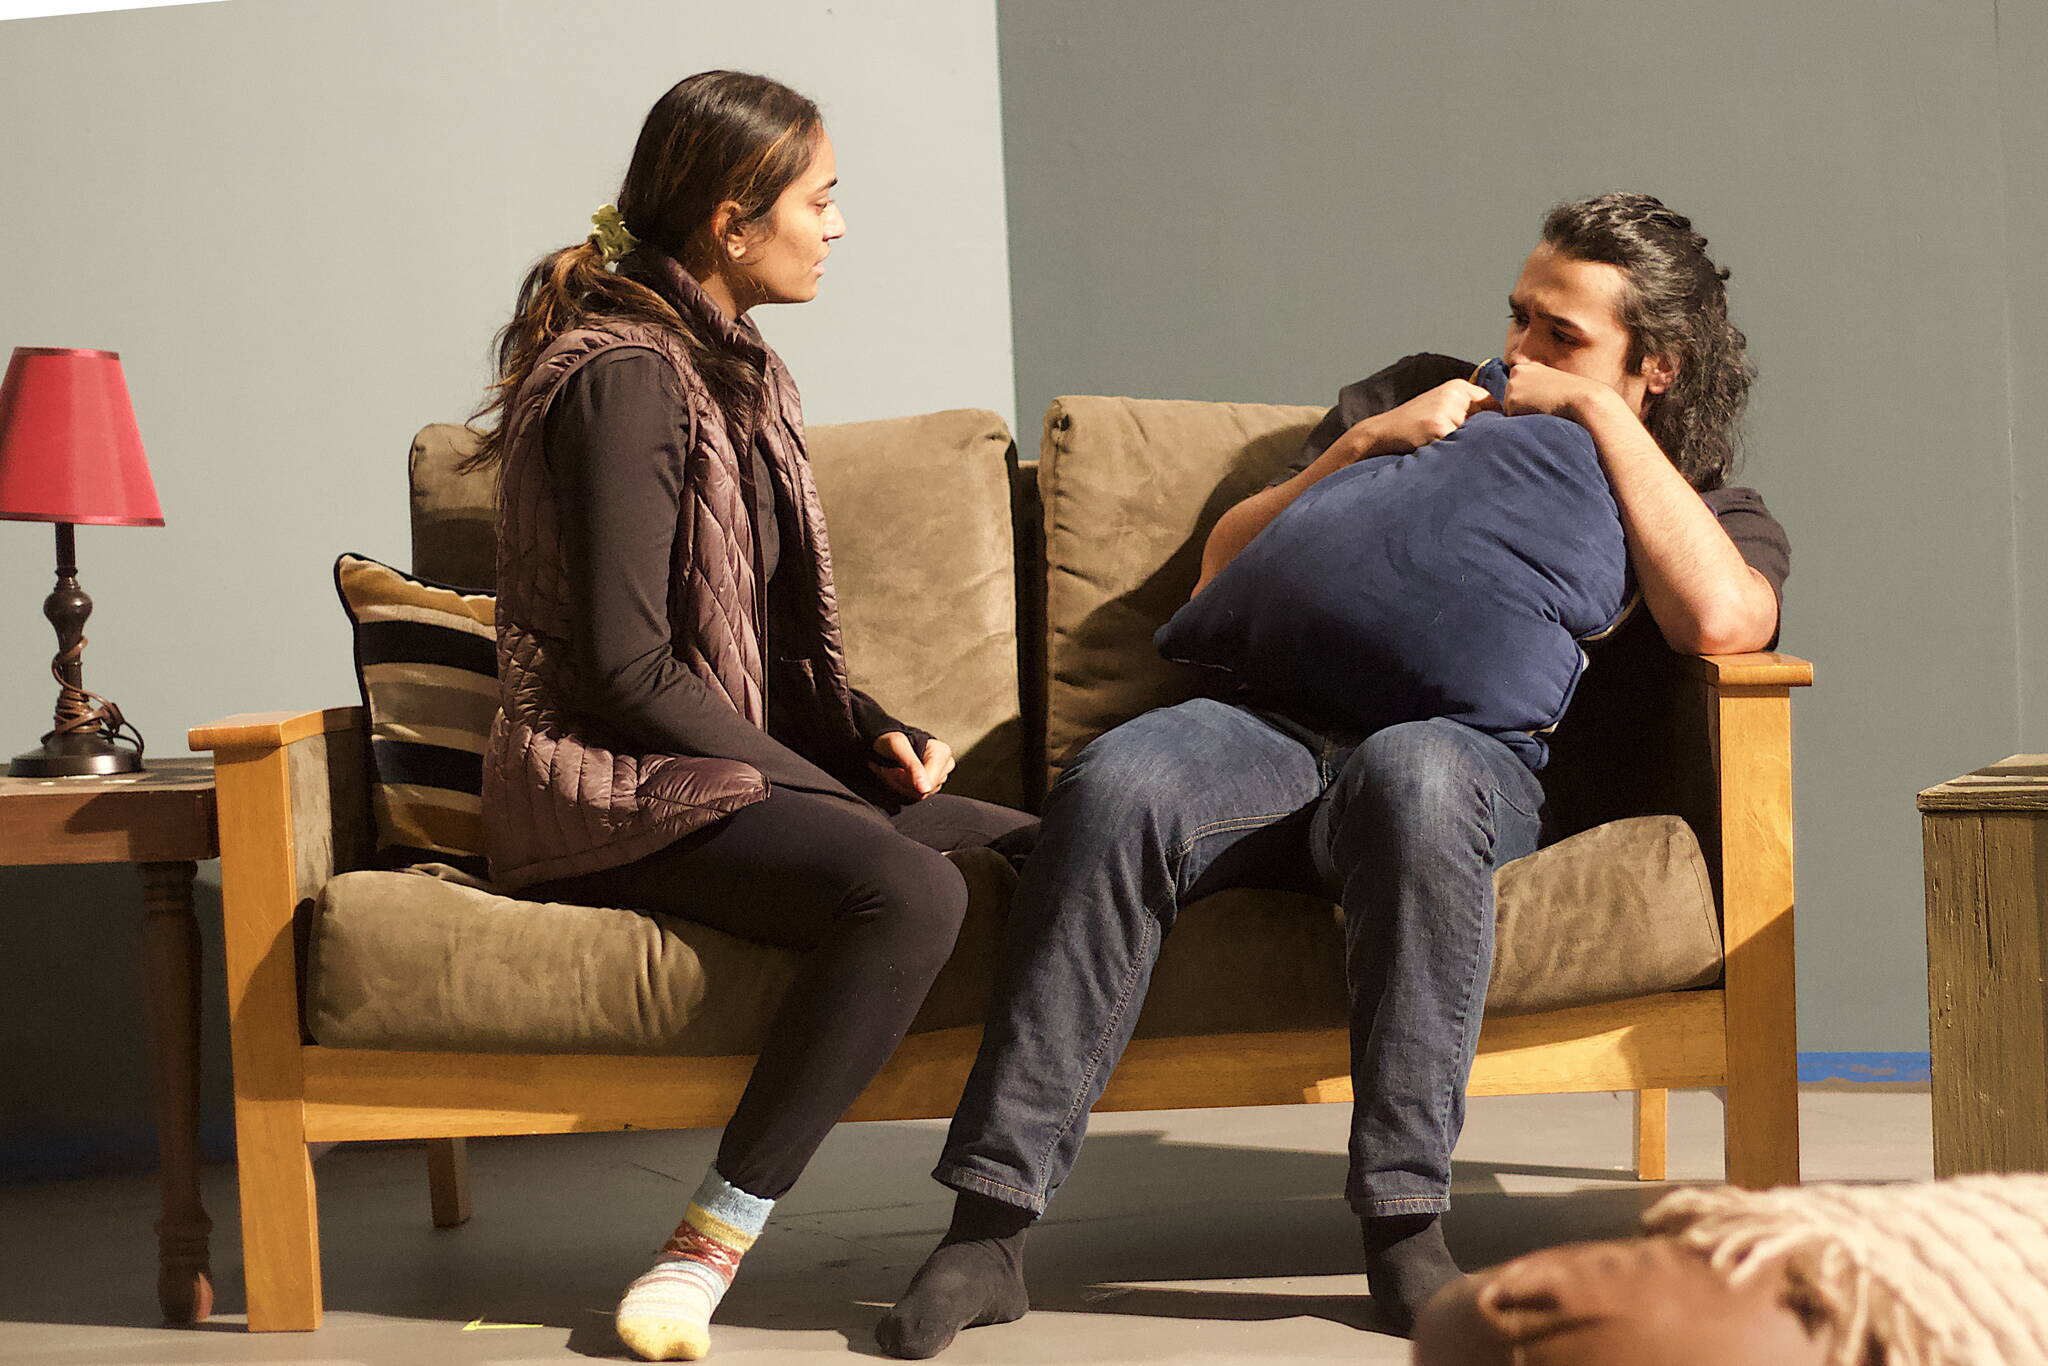 Aditi Sanghvi, left, confronts Tristan Cameron about relationship issues during a rehearsal scene Tuesday night for Perseverance Theatre’s upcoming production of “A Nice Indian Boy.” (Mark Sabbatini / Juneau Empire)